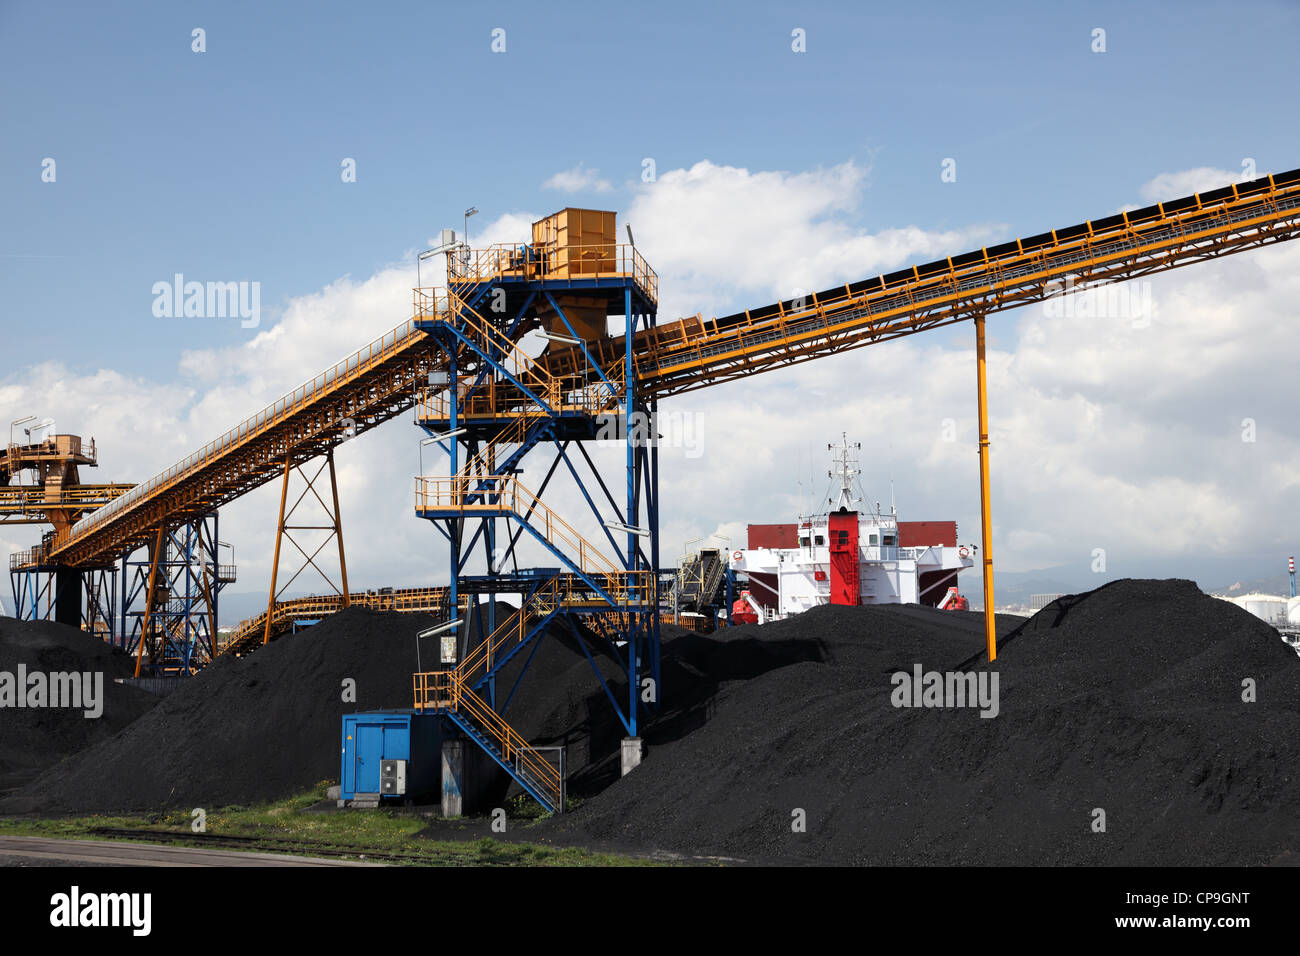 Black coal at the industrial port Stock Photo